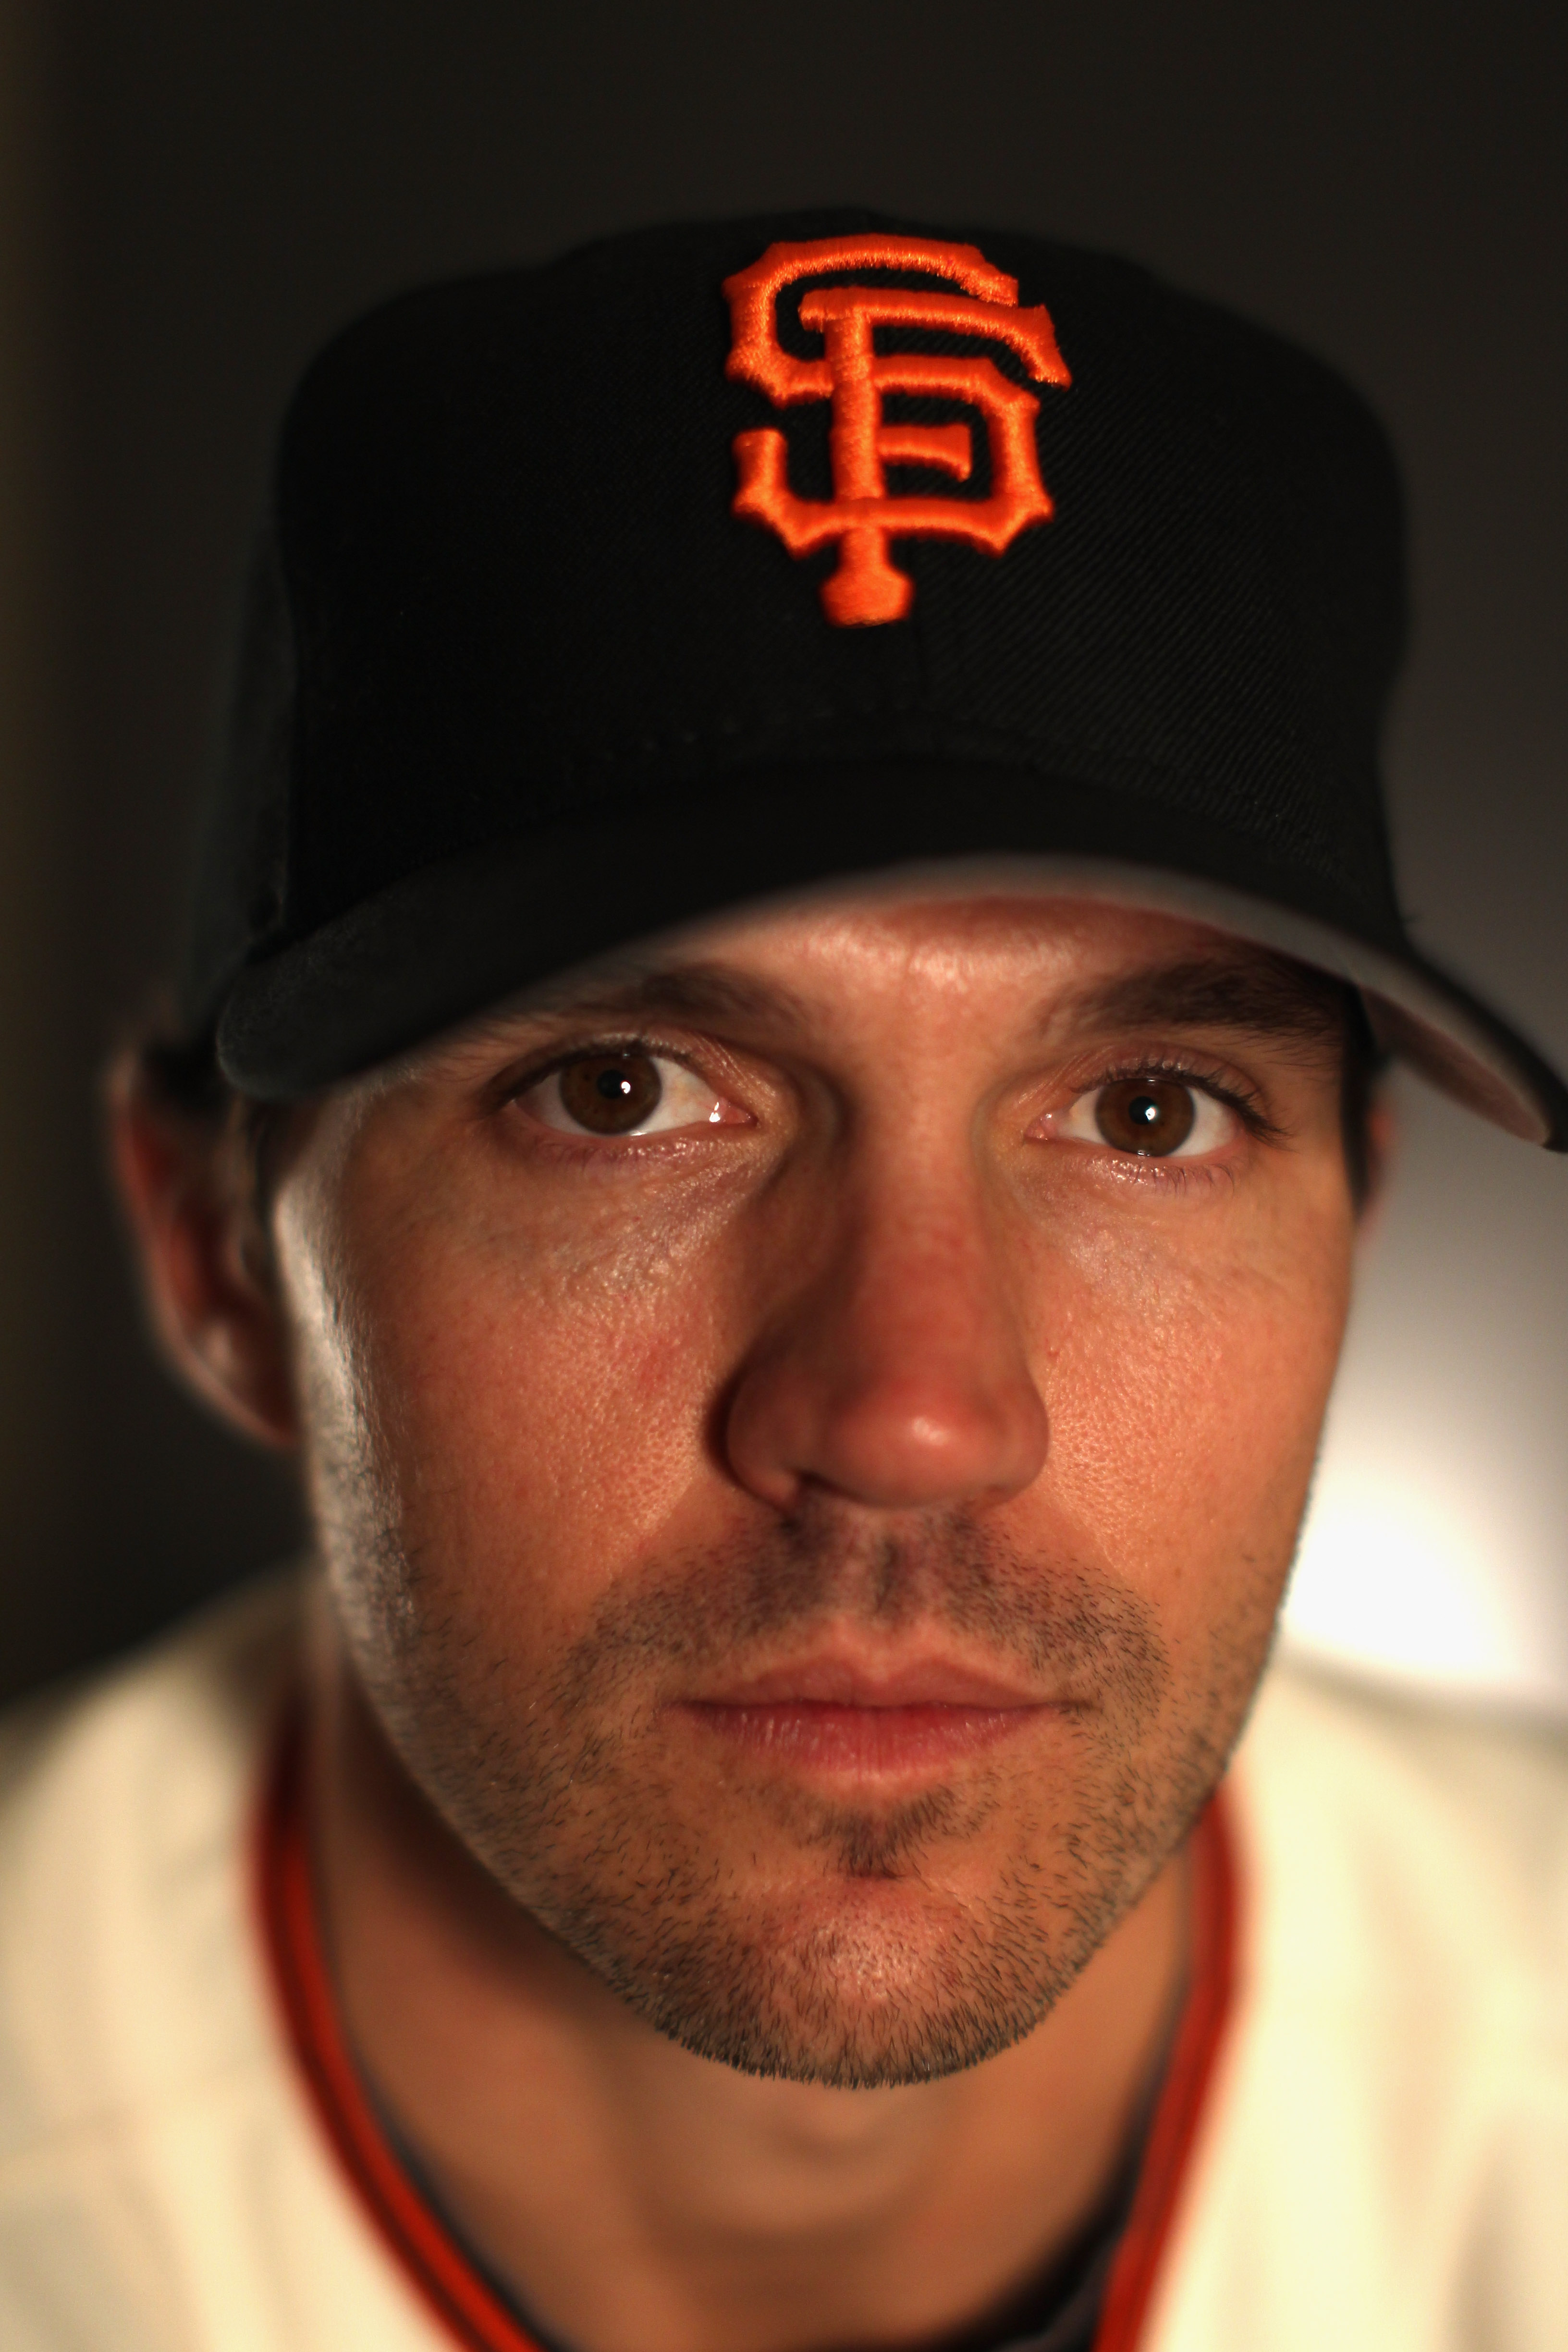 Former Giant Barry Zito posts emotional Buster Posey tribute – NBC